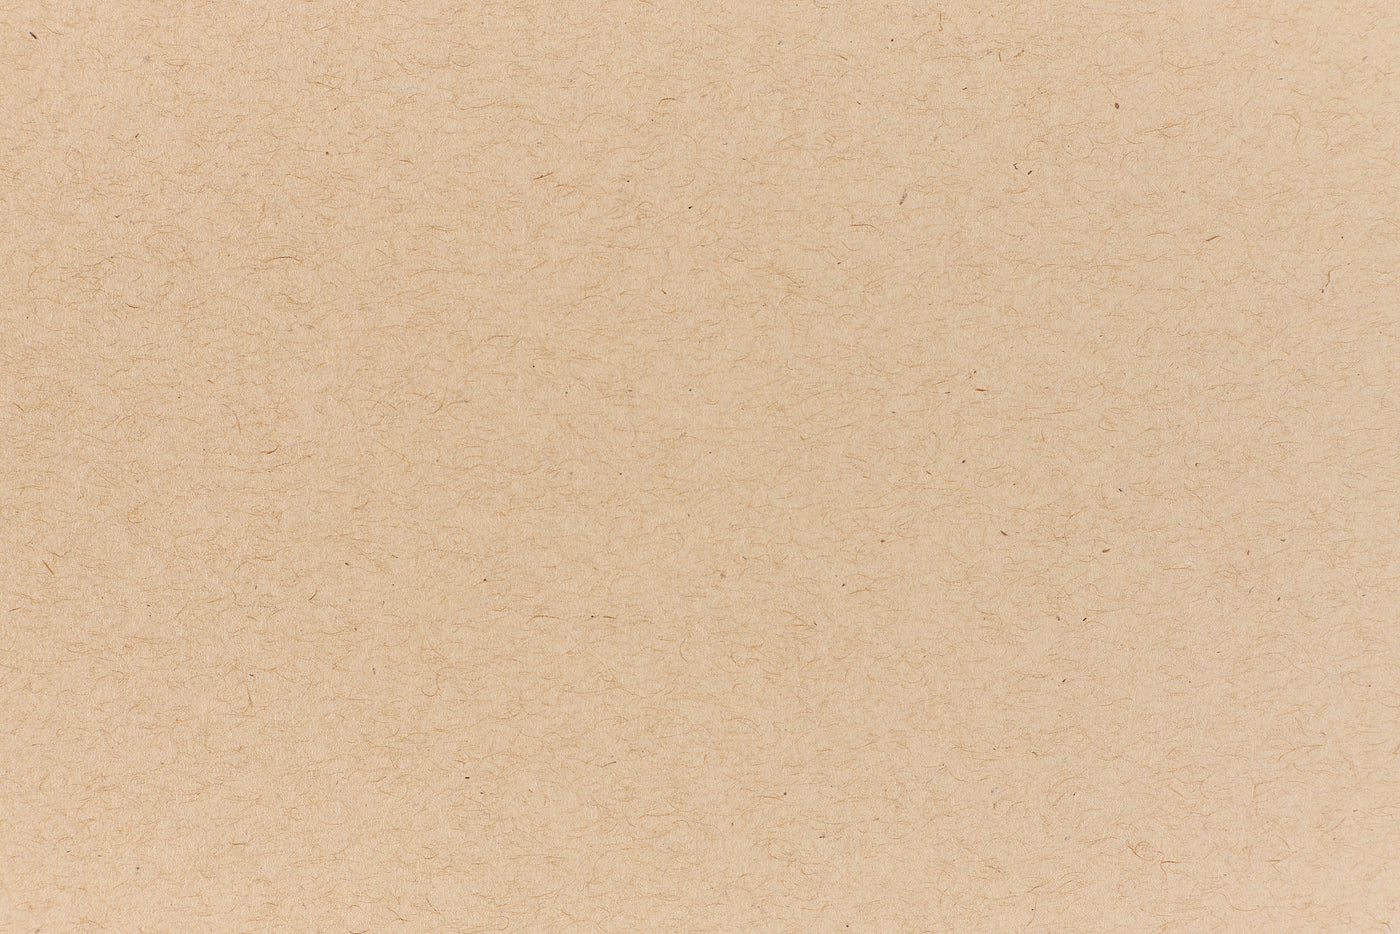 Oatmeal Paper (Speckletone, Text Weight)